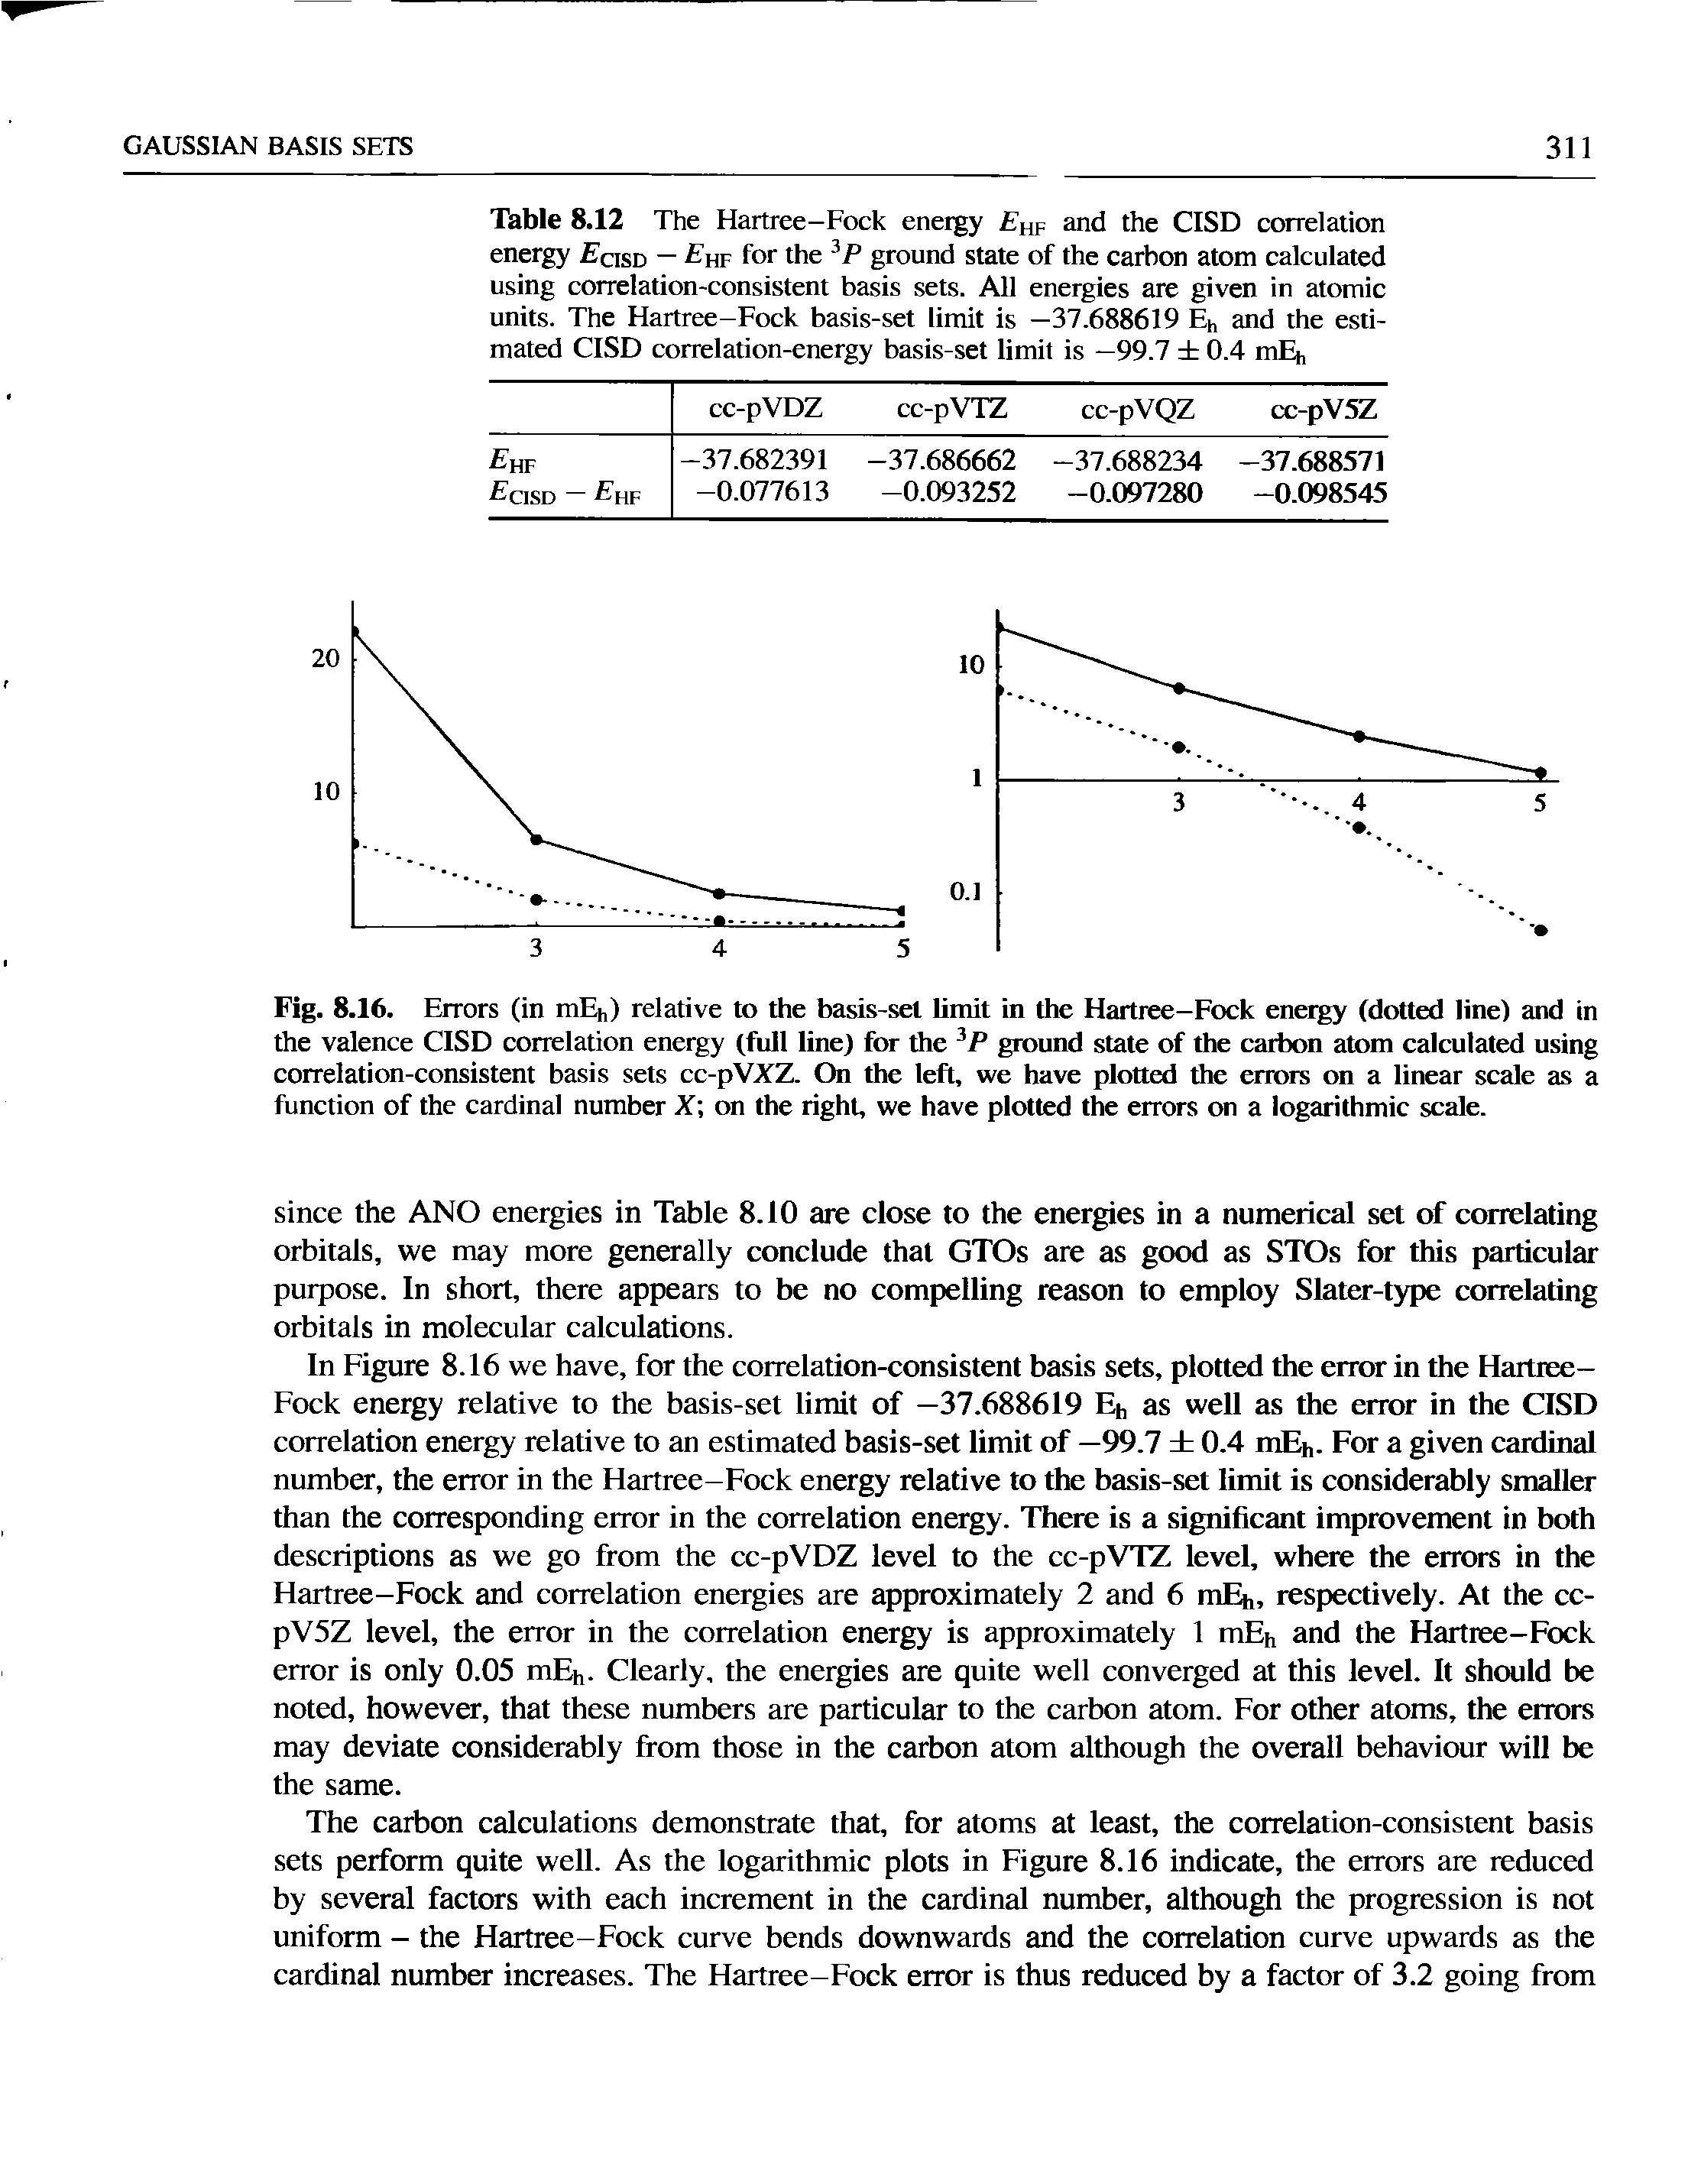 Fig. 8.16. Errors (in mEh) relative to the basis-set limit in the Hartree-Fock energy (dotted line) and in the valence CISD correlation energy (full line) for the ground state of the carbon atom calculated using correlation-consistent basis sets cc-pVXZ. On the left, we have plotted the errors on a linear scale as a function of the cardinal number X on the right, we have plotted the errors on a logarithmic scale.